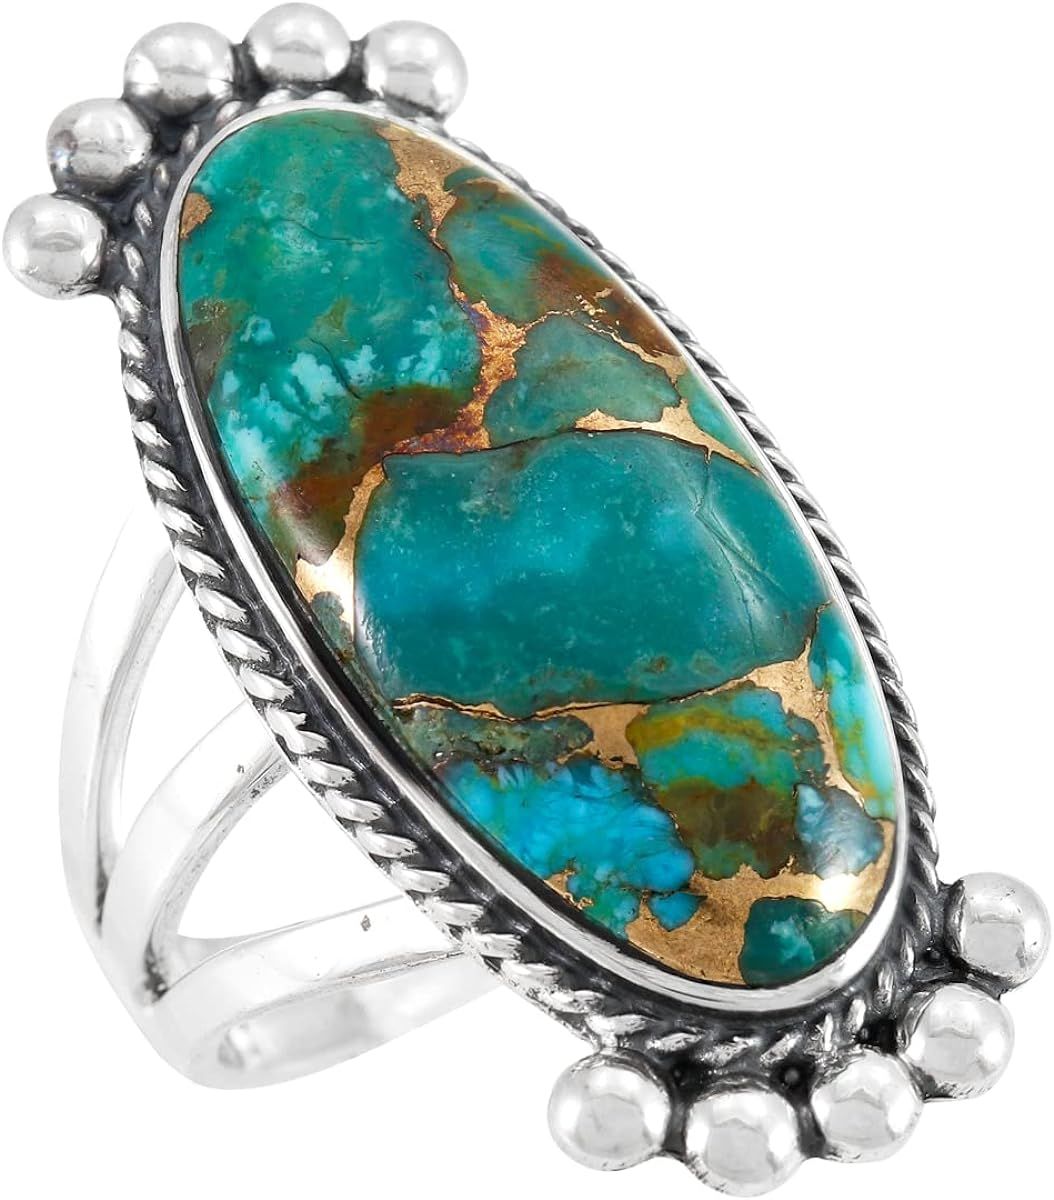 Turquoise Ring Sterling Silver 925 Genuine Gemstones Size 6 to 11 | Amazon (US)